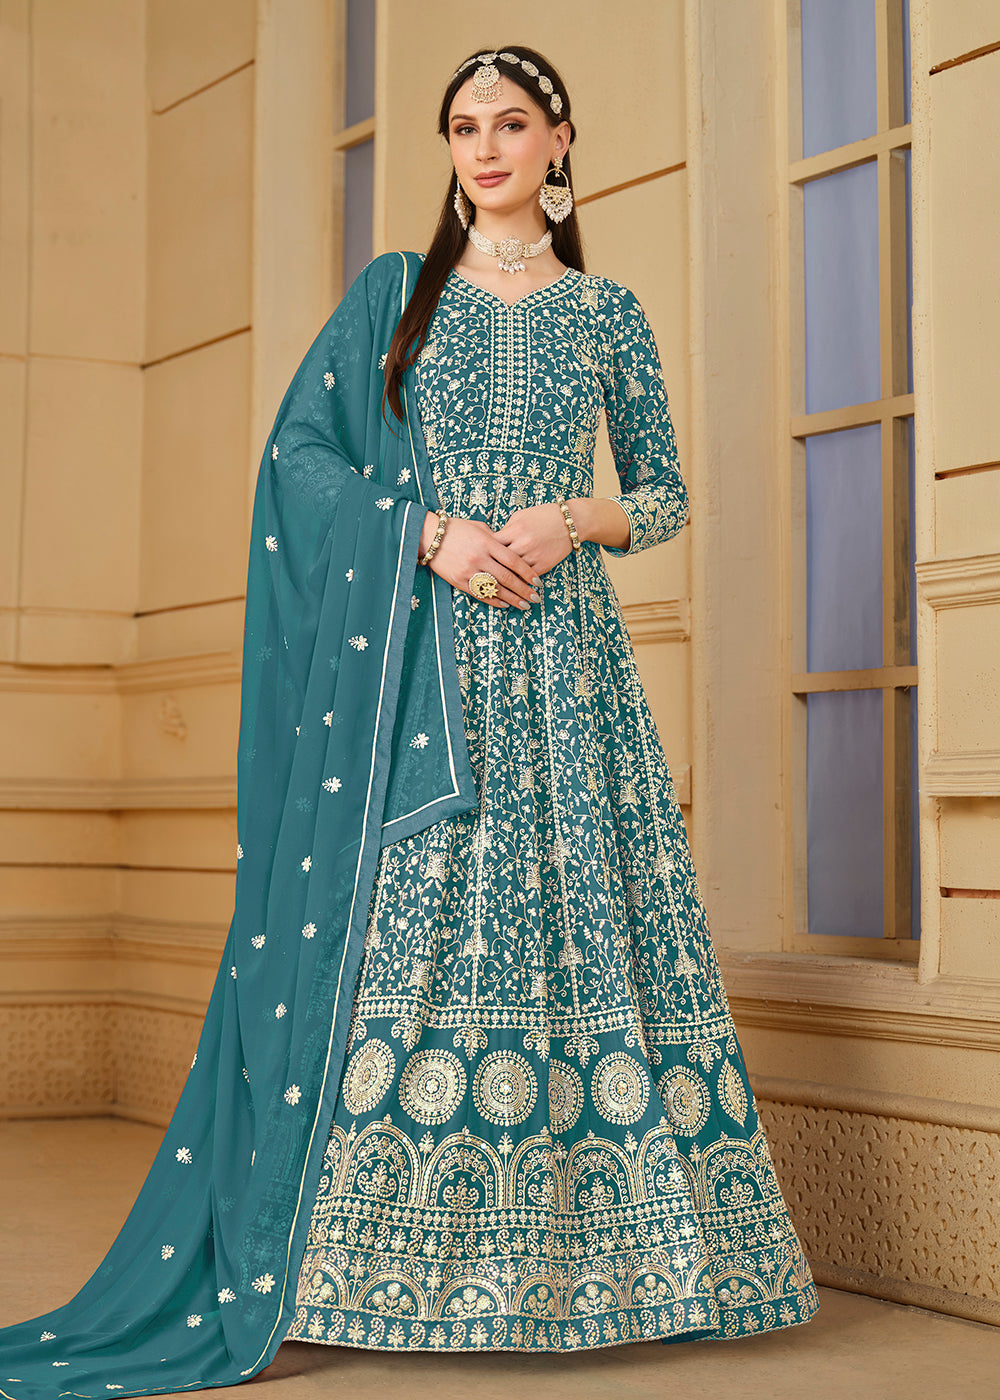 Buy Now Turquoise Thread & Sequins Georgette Anarkali Suit Online in USA, UK, Australia, New Zealand, Canada & Worldwide at Empress Clothing.